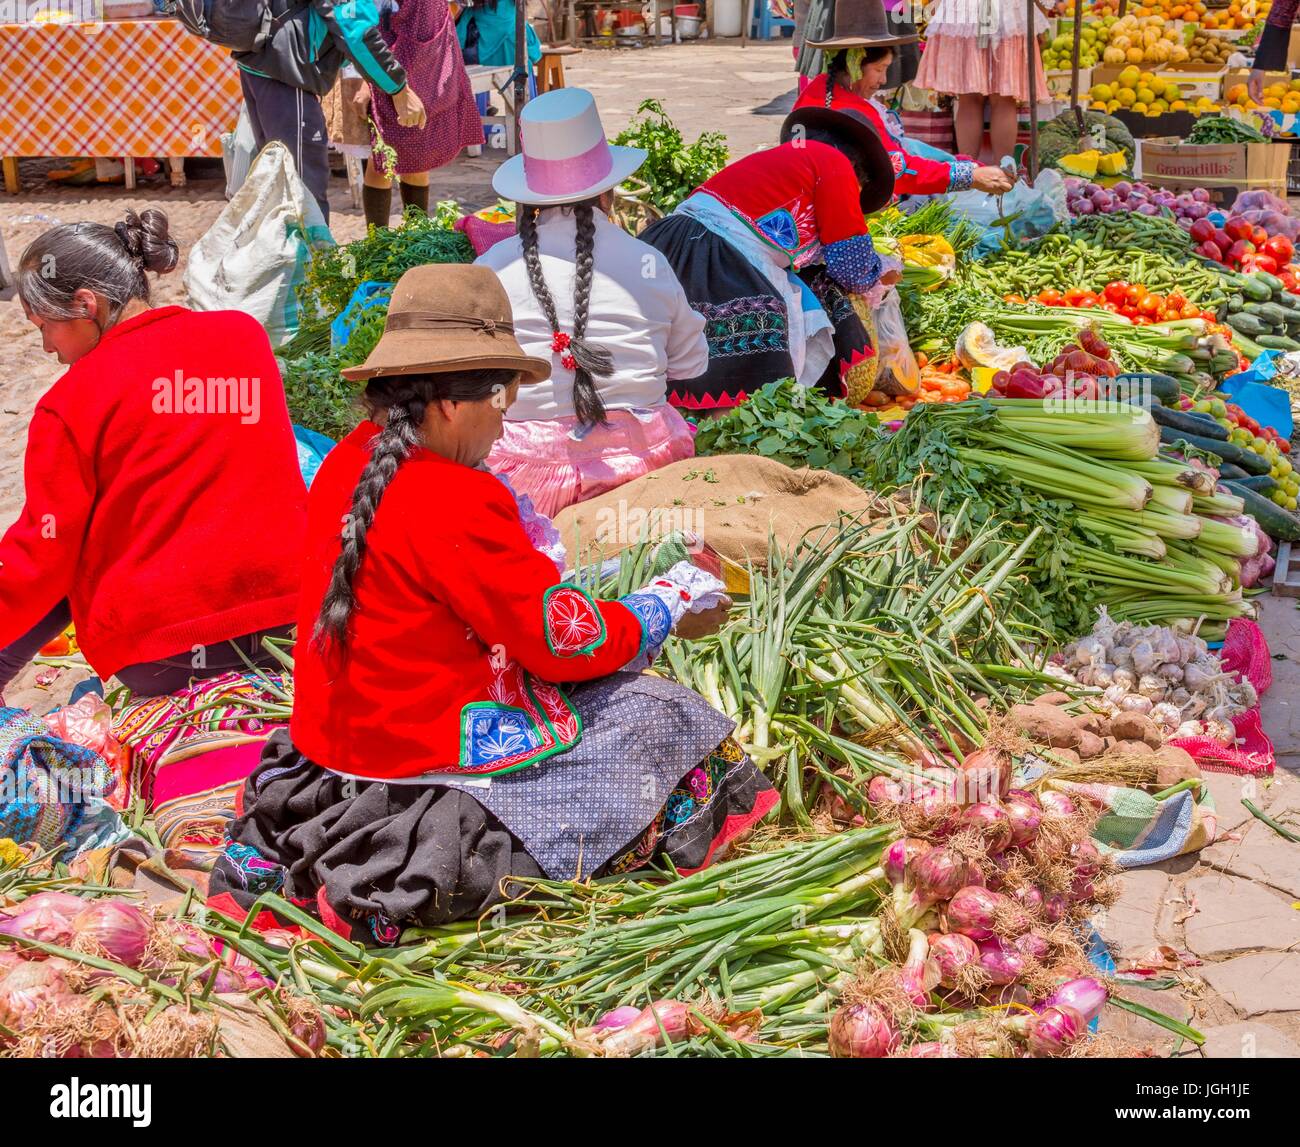 Pisac Peru market, local Peruvian women with braided hair, hats and wearing traditional clothing, sell vegetables at the Pisac Market, South America. Stock Photo